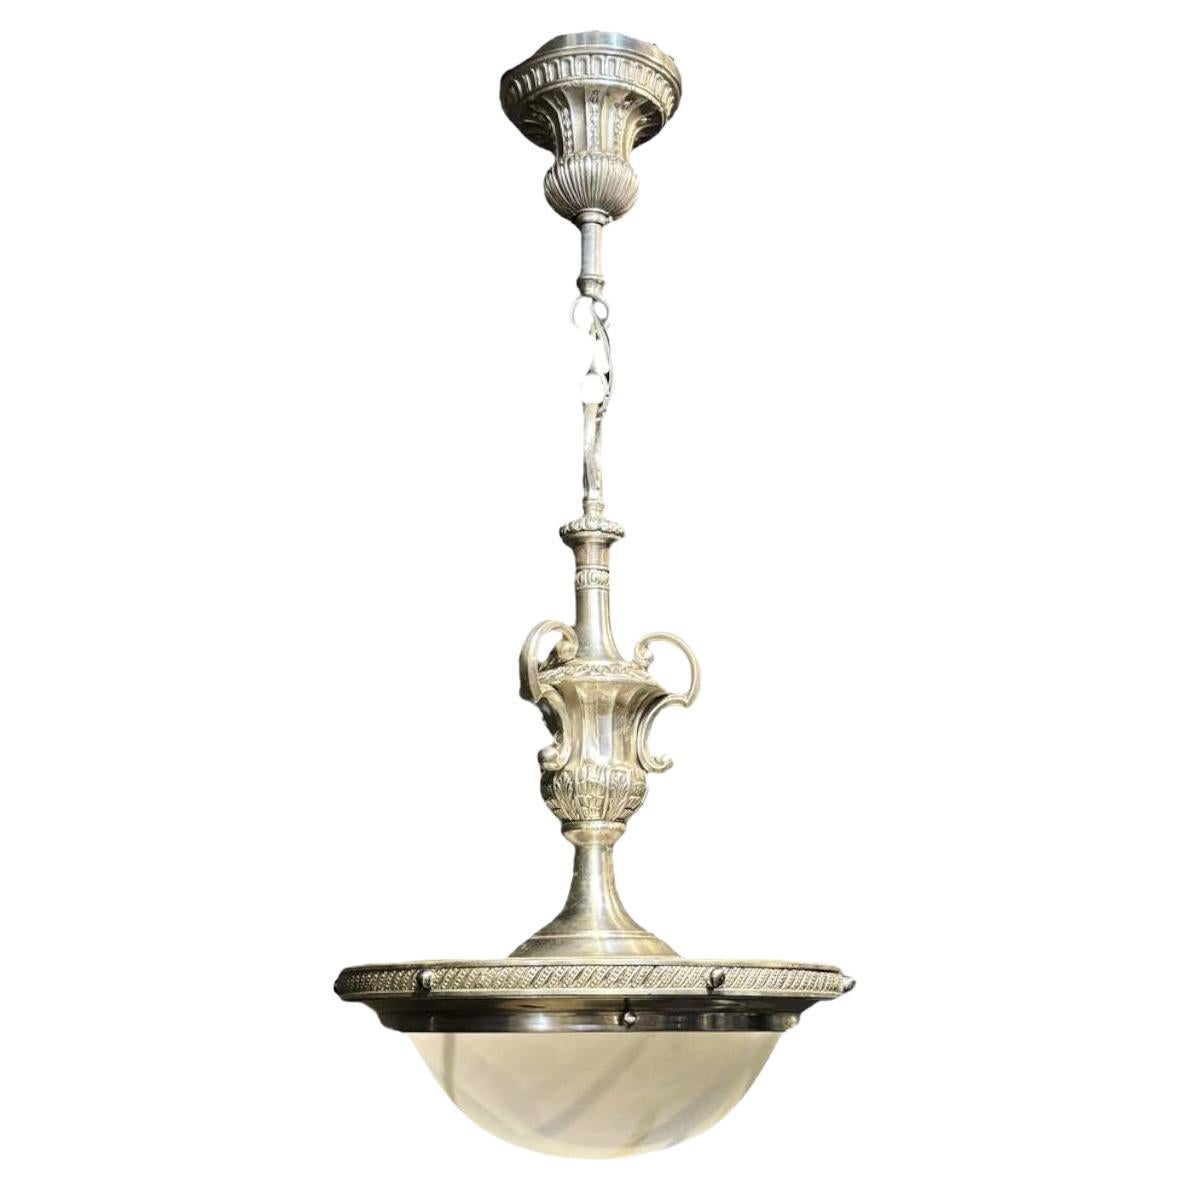 1930's French Light Fixture with Opaline Glass